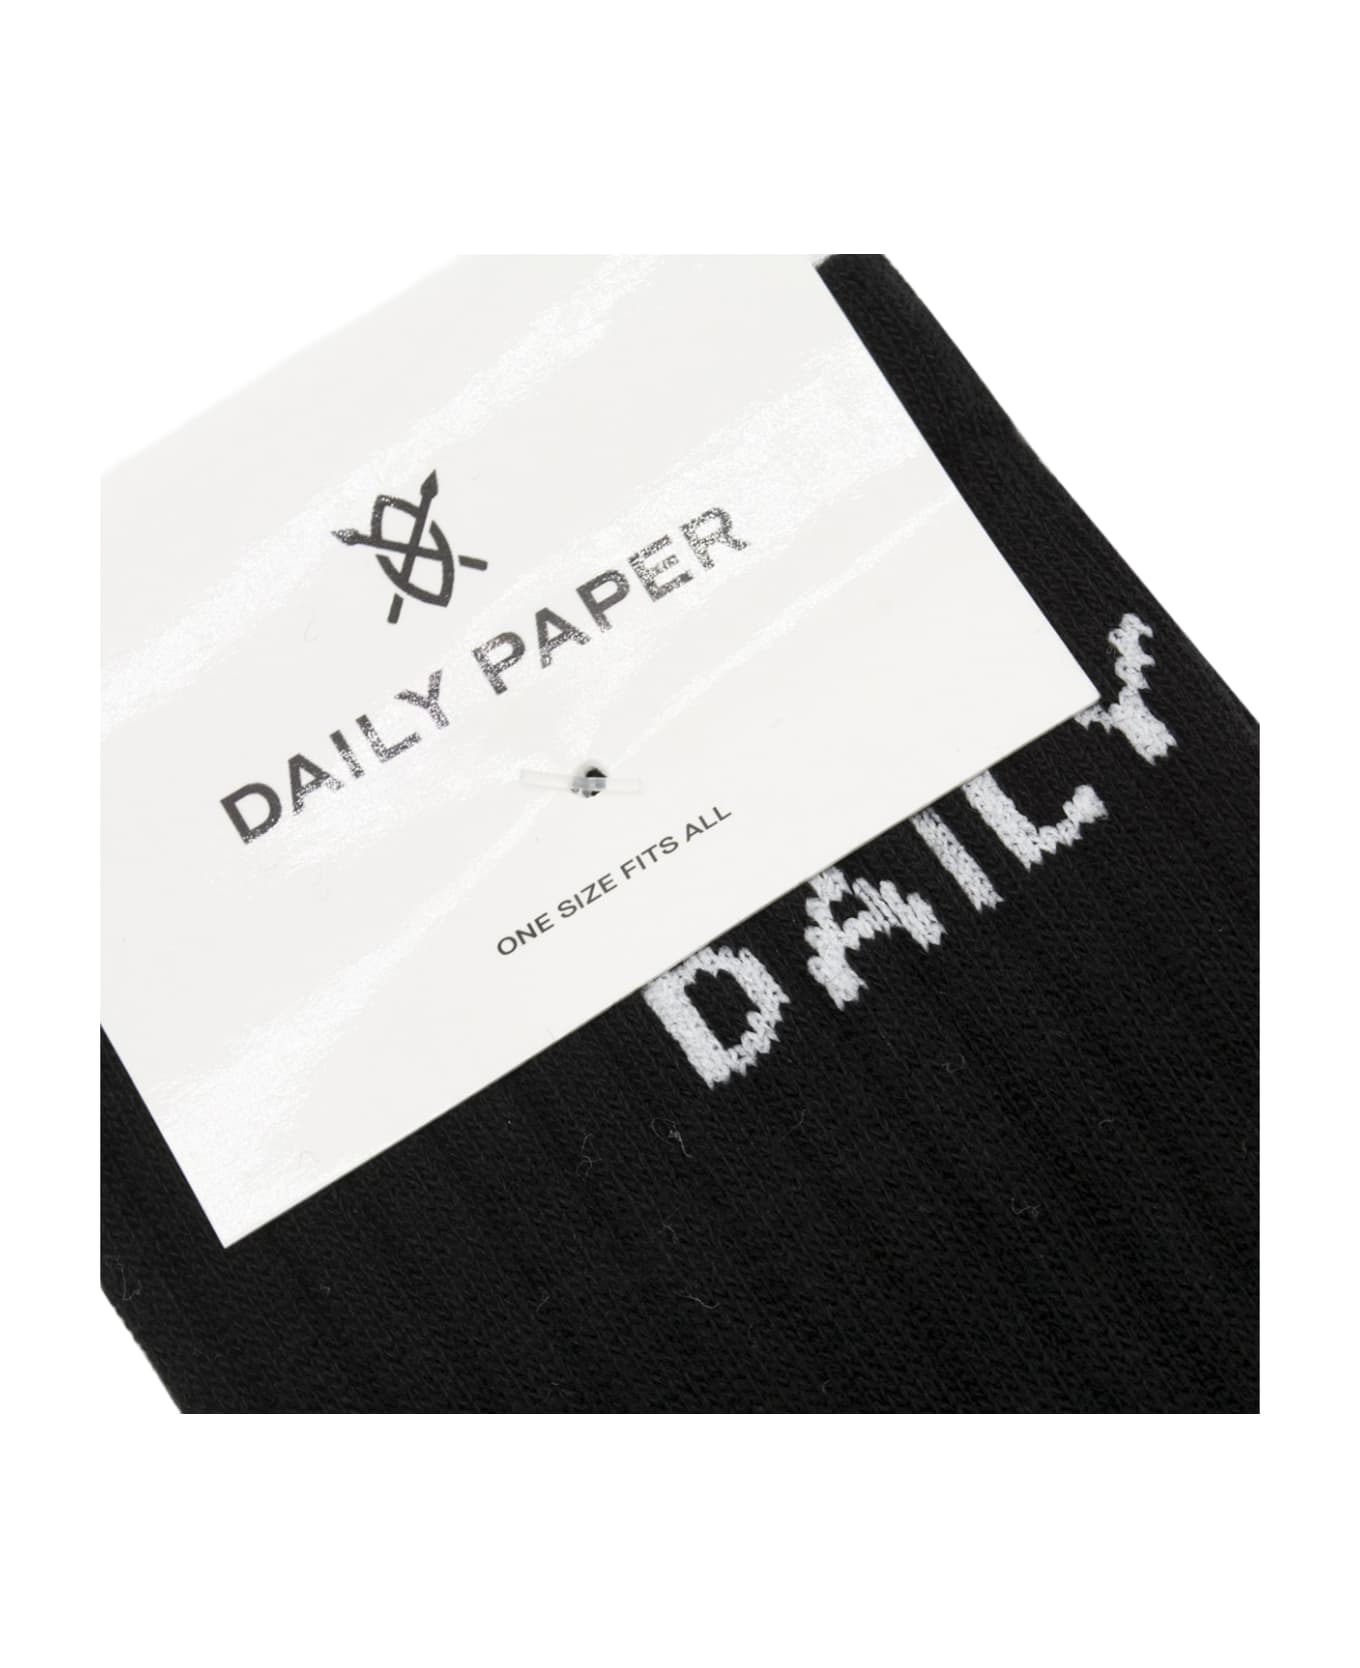 Daily Paper Black And White Cotton Blend Socks - Black 靴下